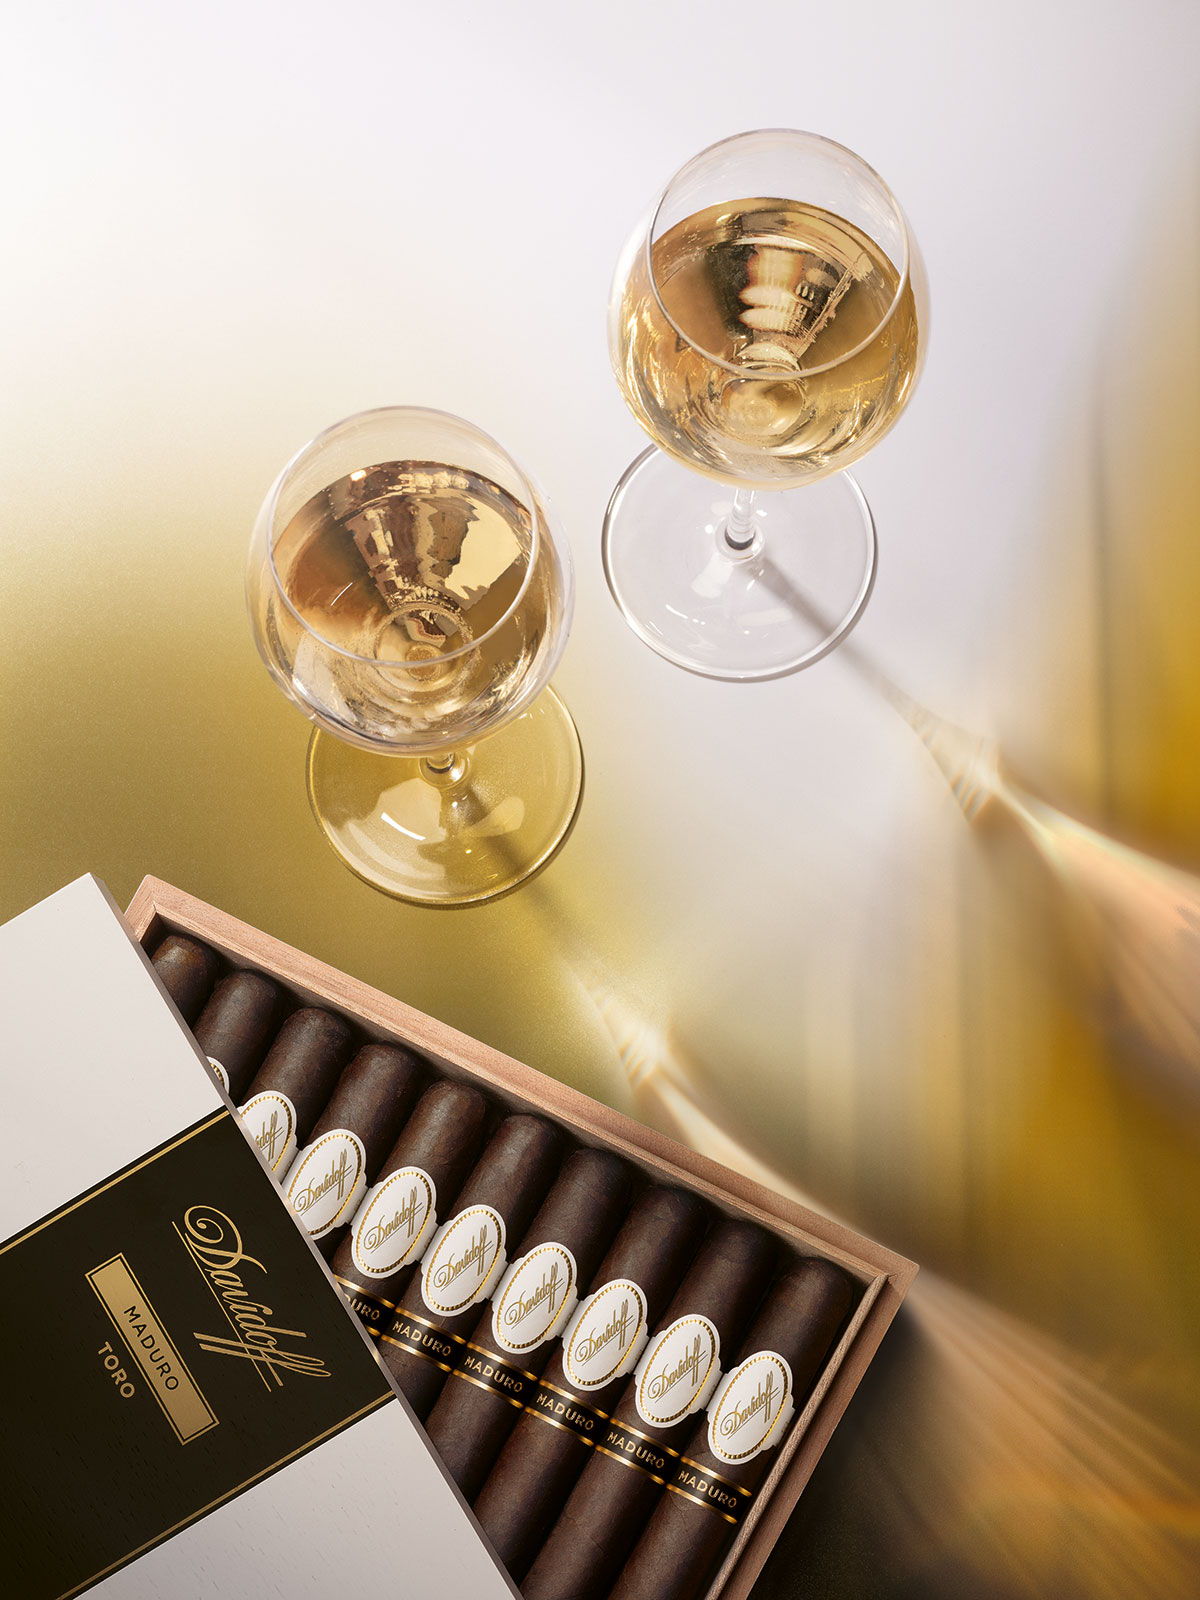 Opened box of the Davidoff Maduro Toro next to two glasses filled with ice wine.